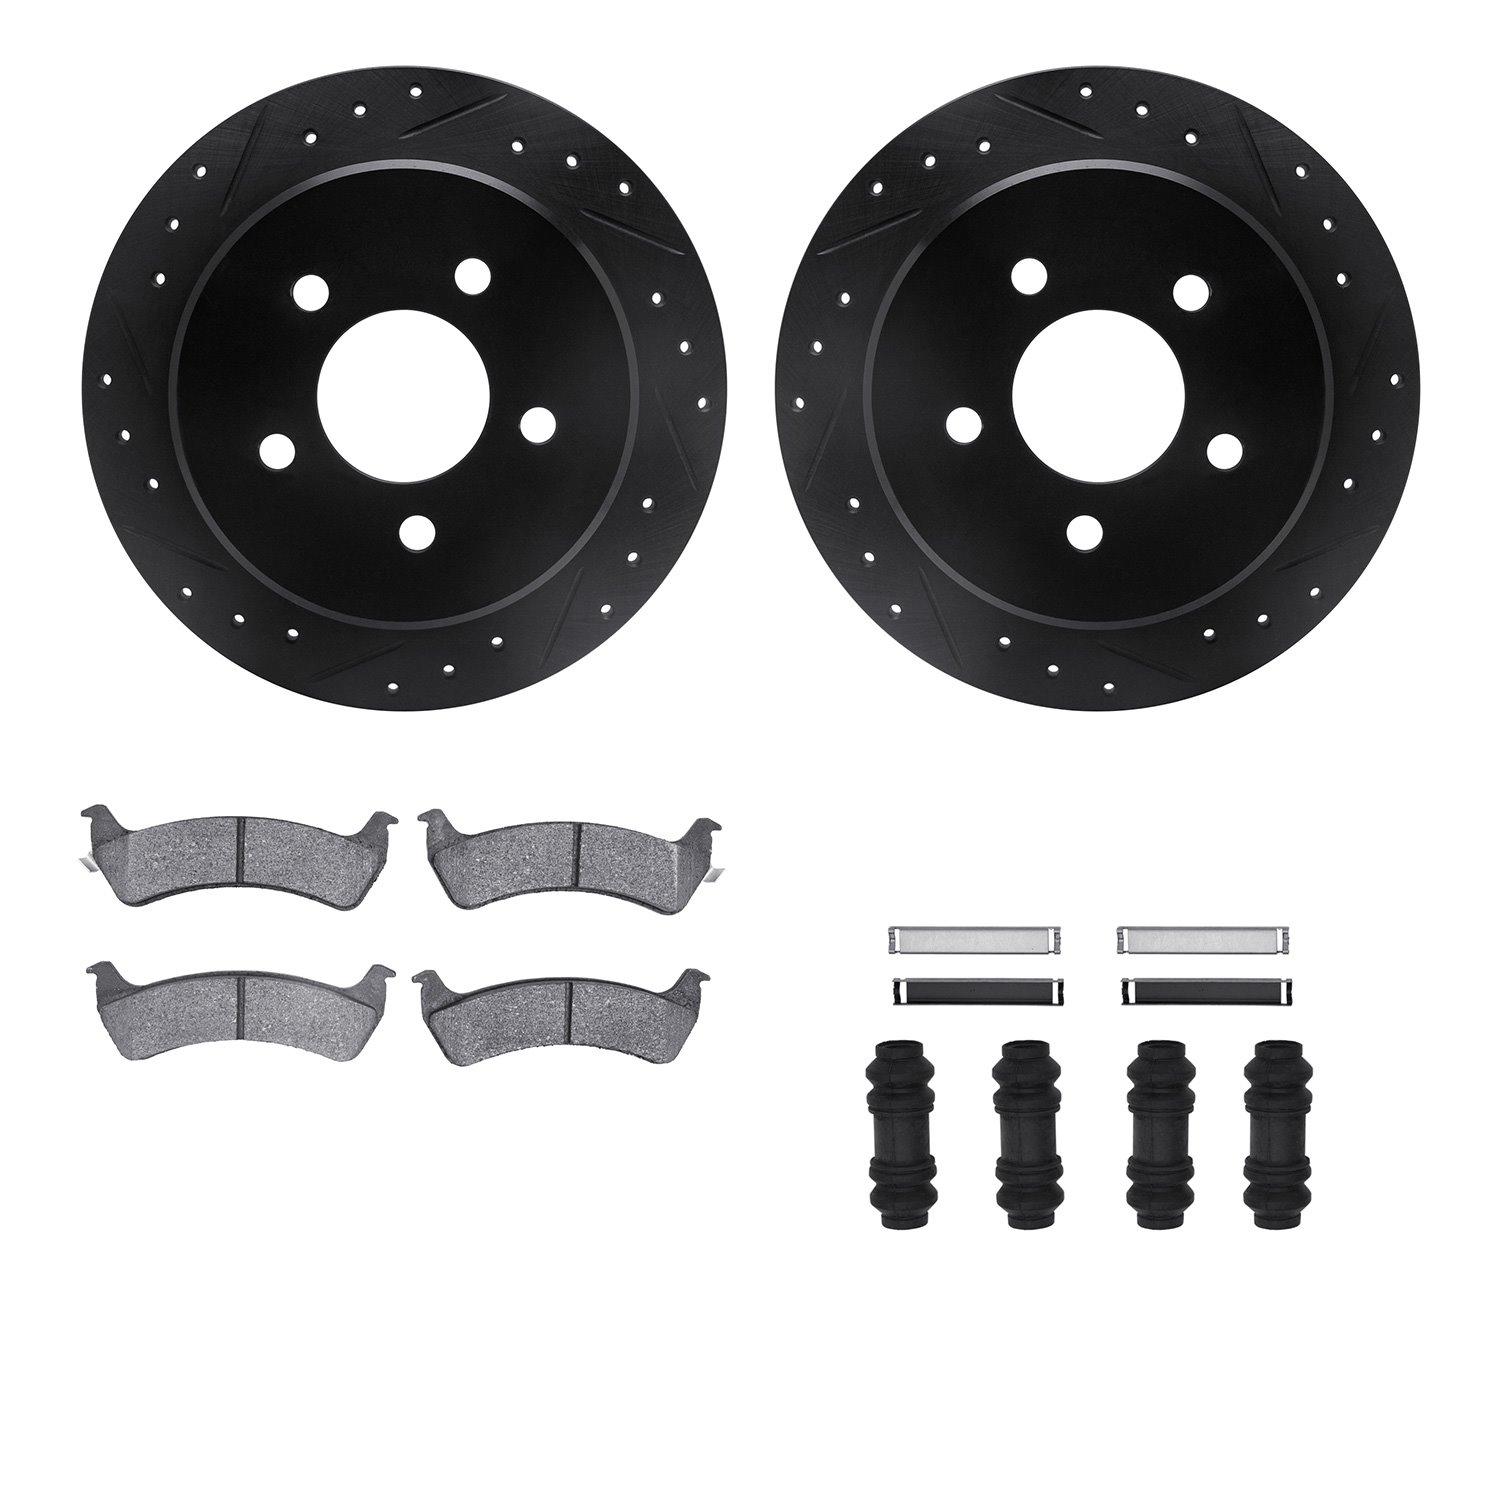 8412-54031 Drilled/Slotted Brake Rotors with Ultimate-Duty Brake Pads Kit & Hardware [Black], 2001-2002 Ford/Lincoln/Mercury/Maz